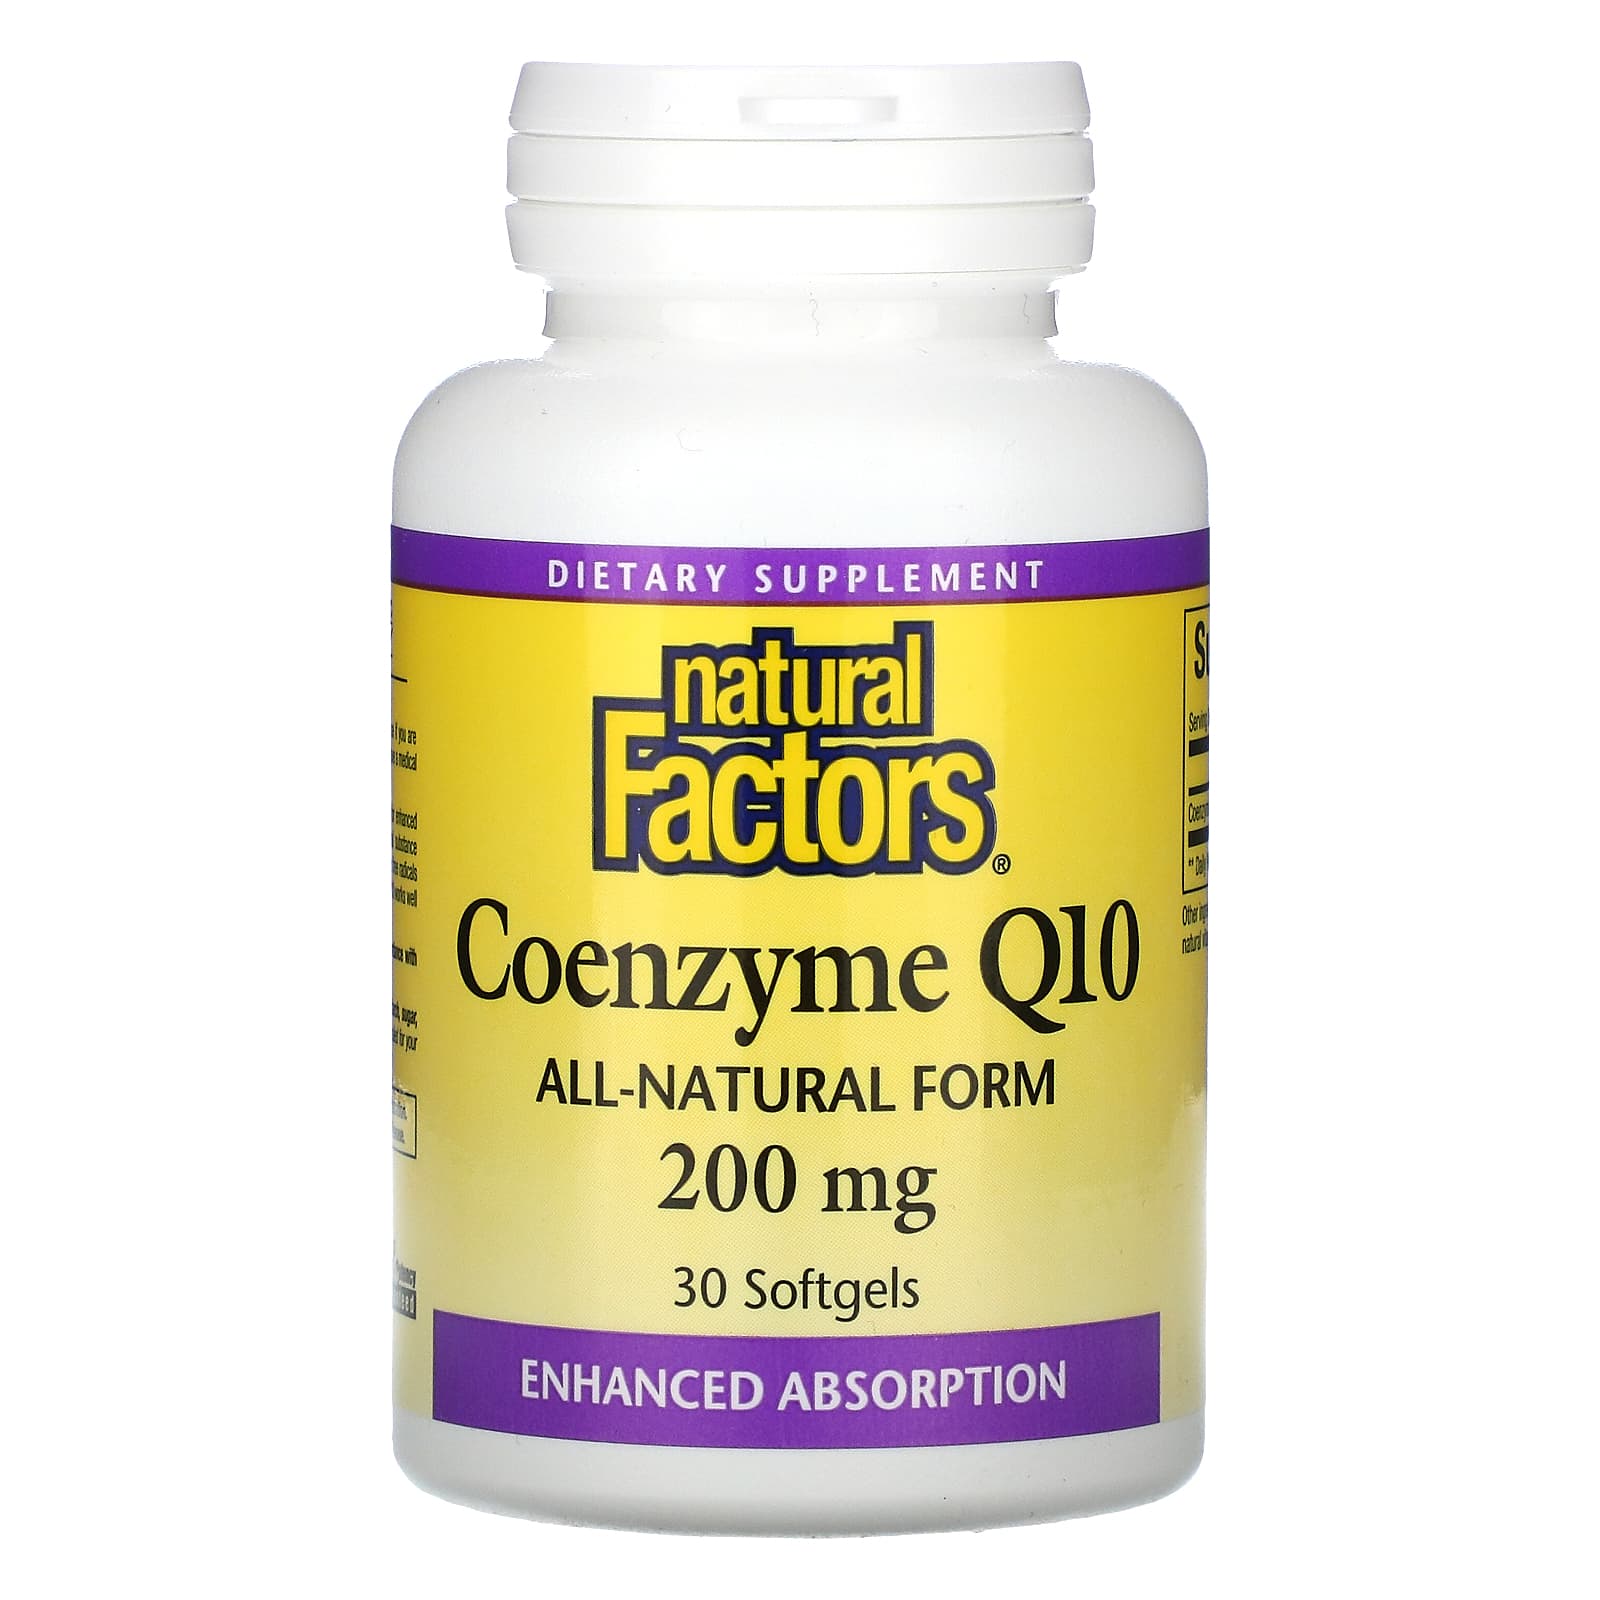 Natural Factors Coenzyme Q10 200 Mg In A Base Of Rice Bran Oil, 30 Softgels